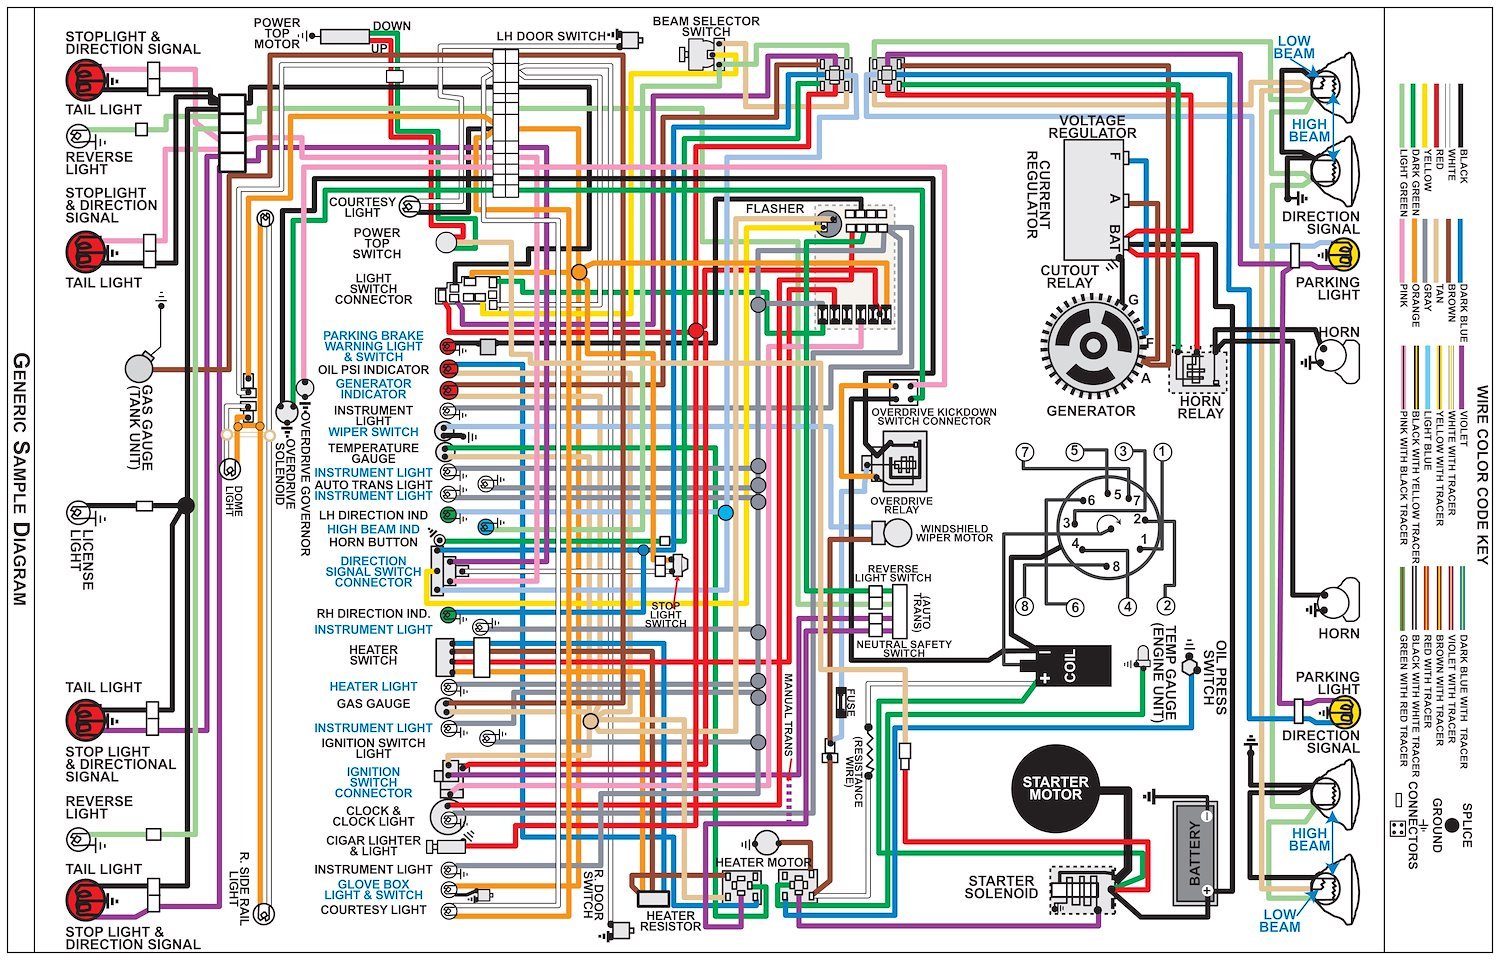 Wiring Diagram for 1963 Ford Fairlane, 11 in x 17 in., Laminated